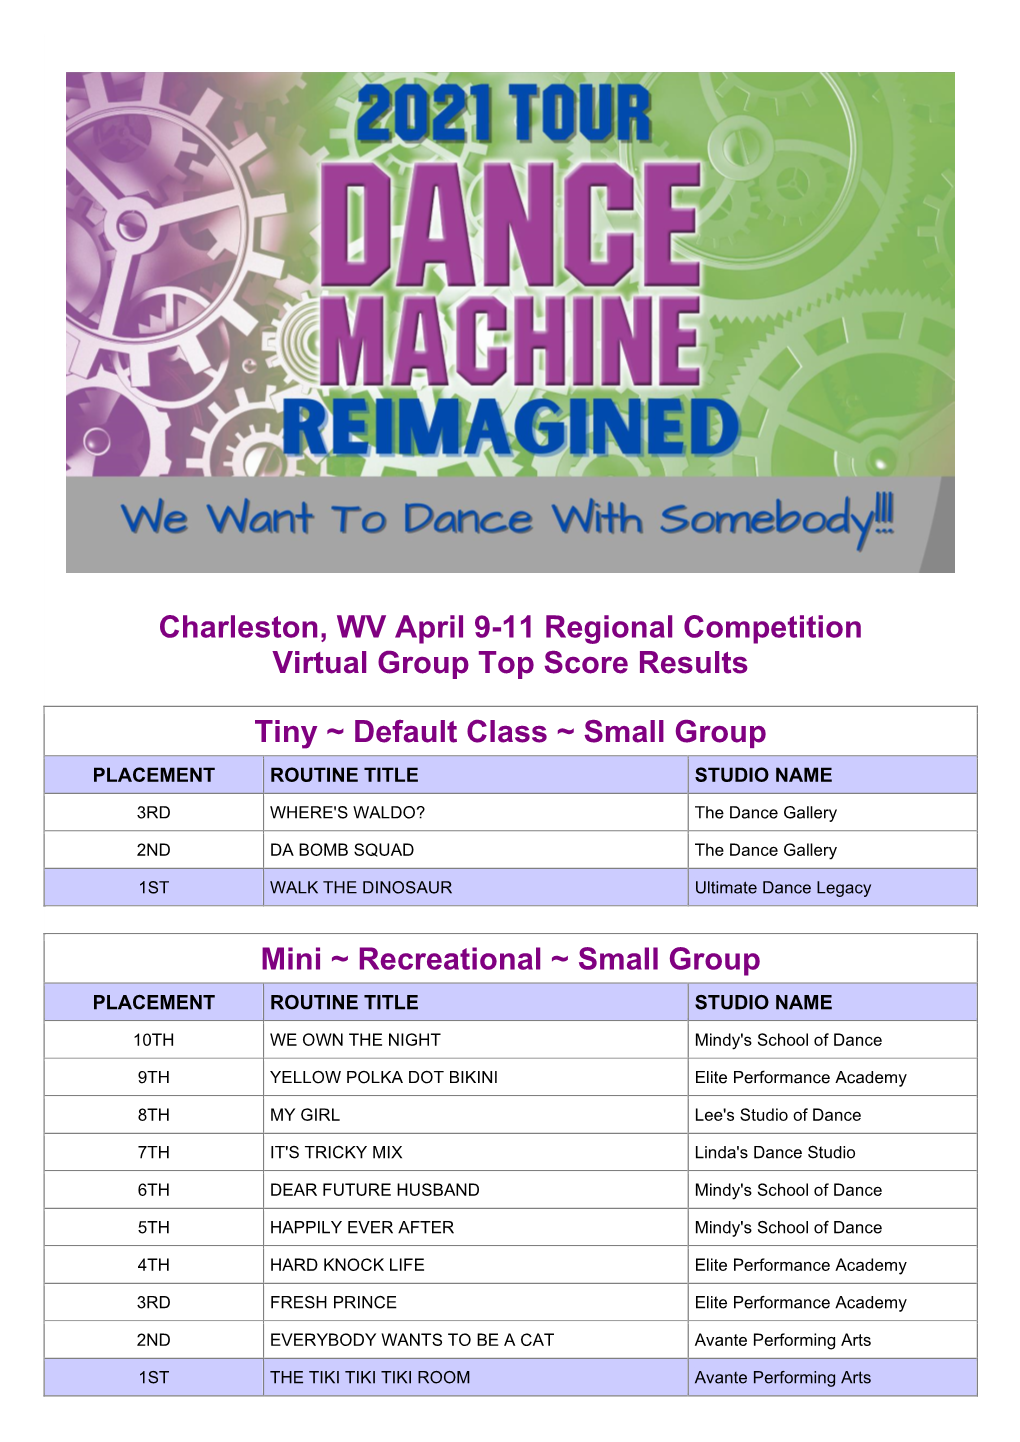 Charleston, WV April 9-11 Regional Competition Virtual Group Top Score Results